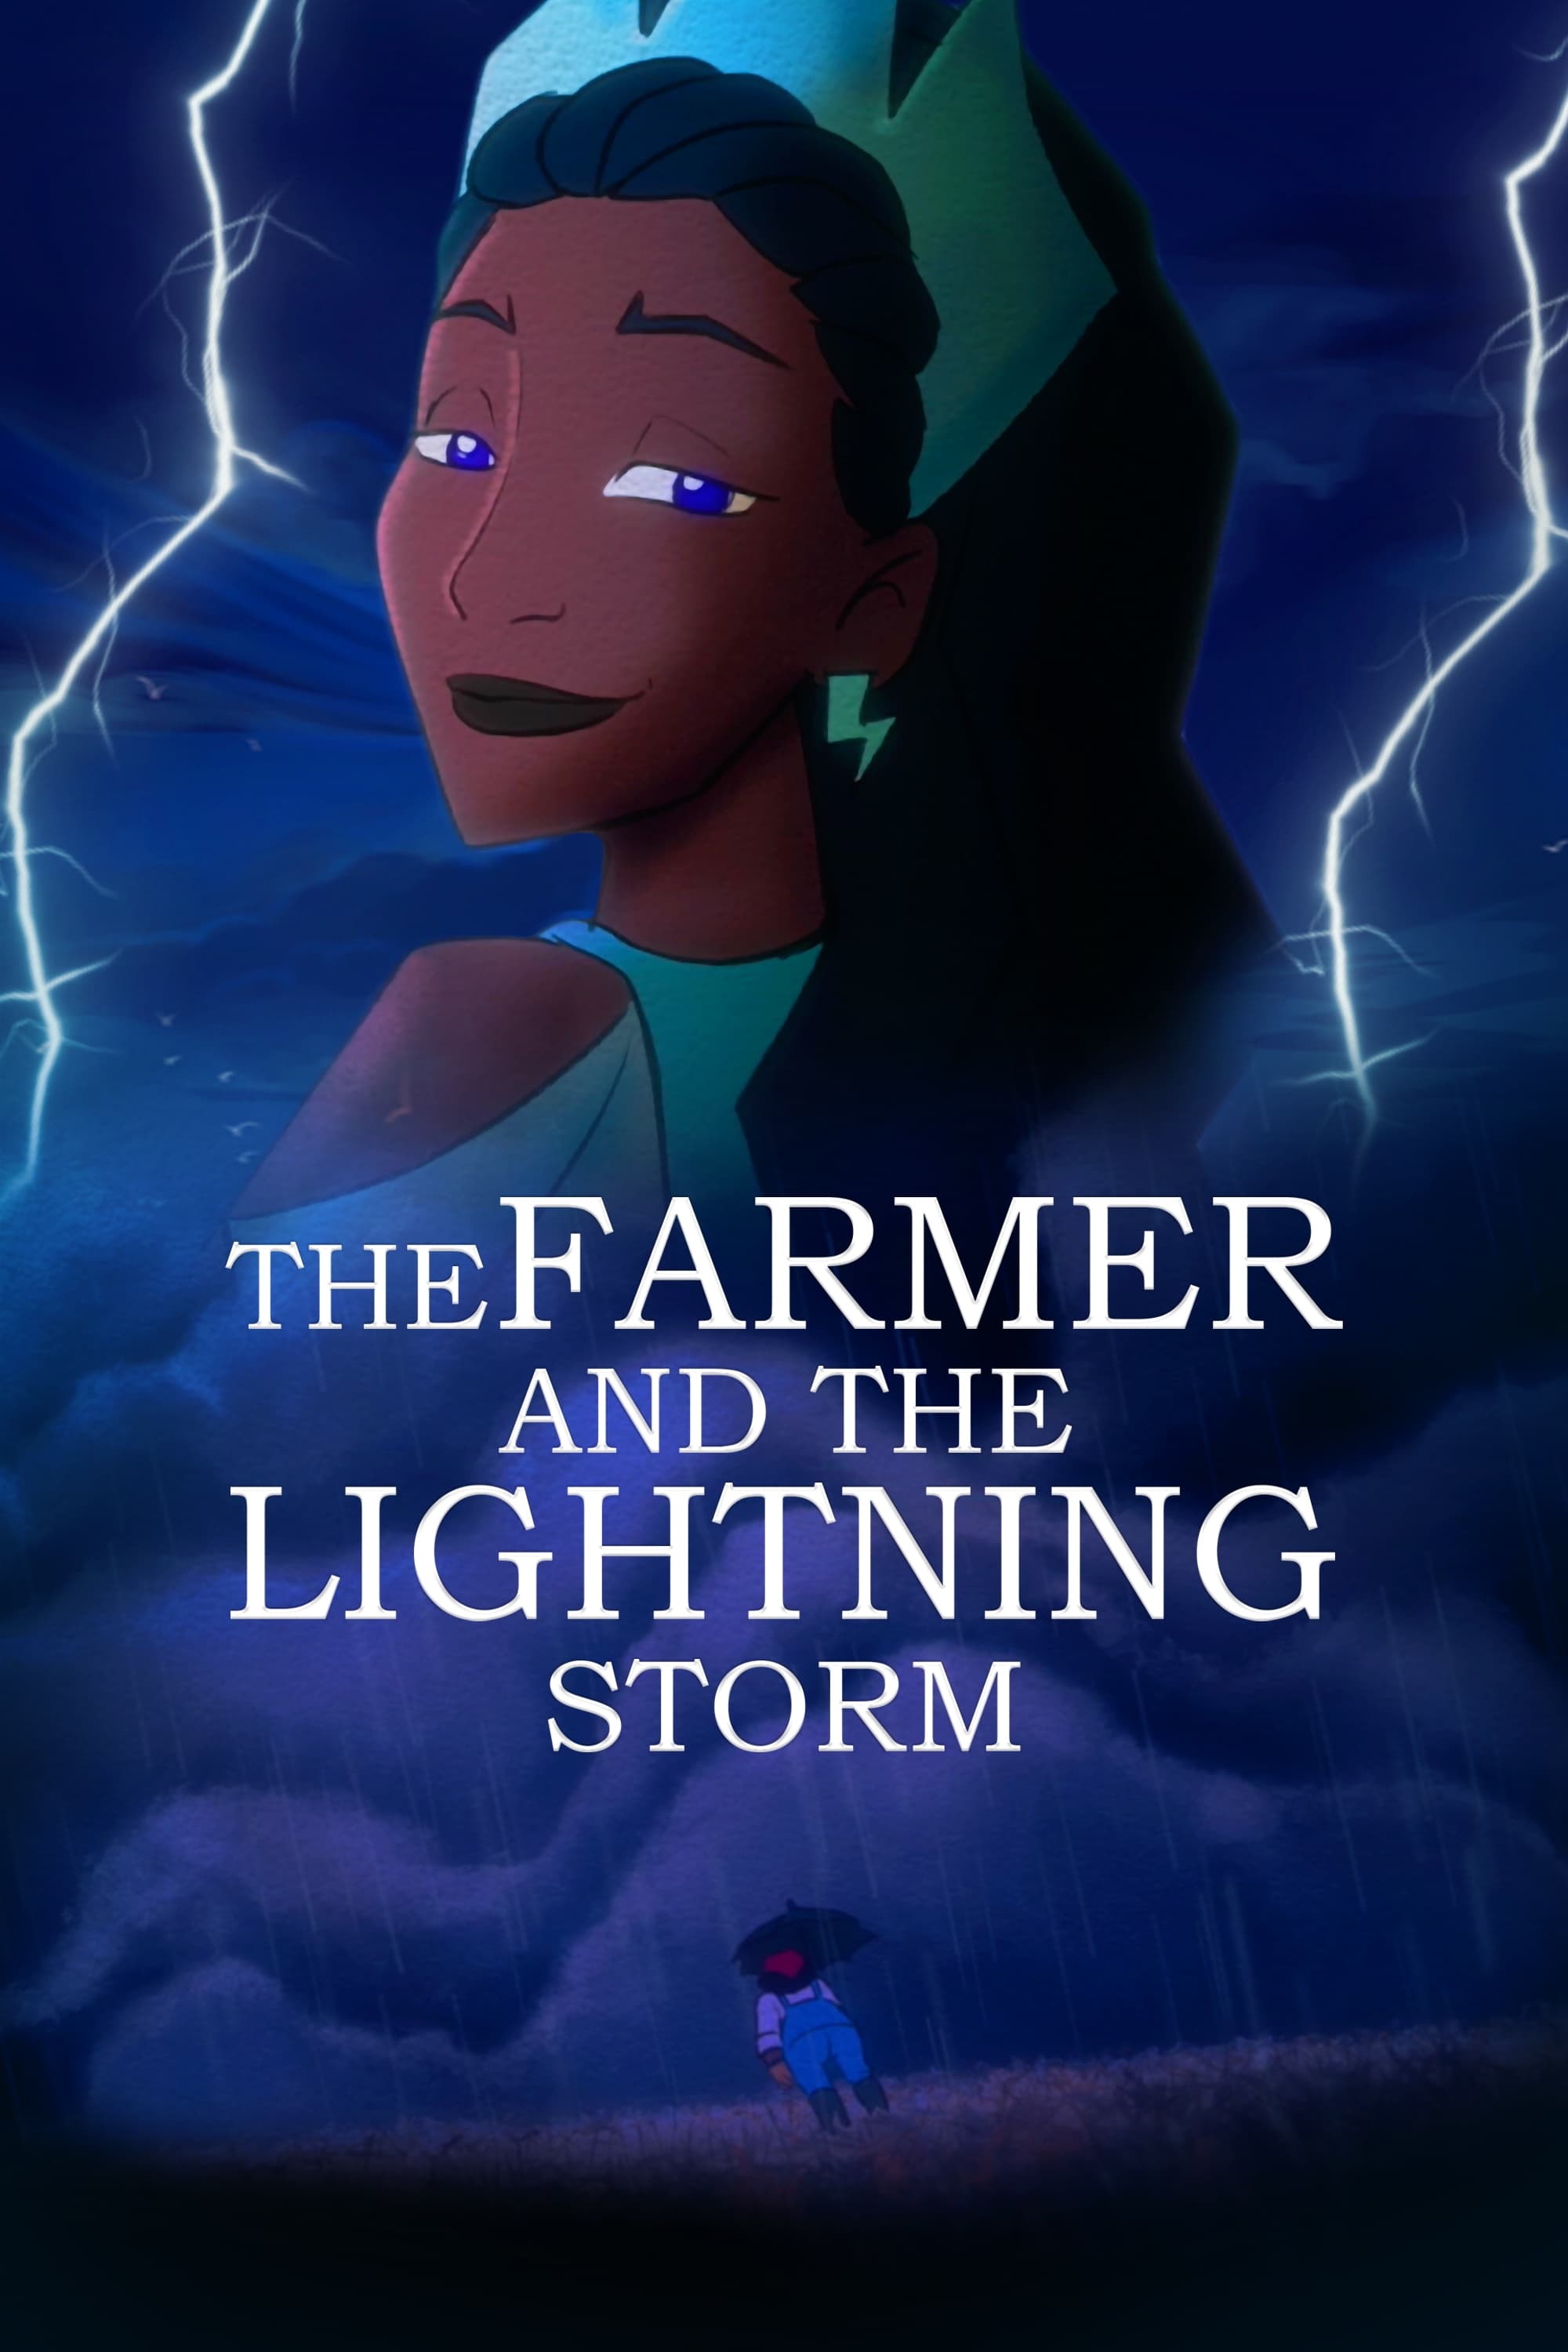 The Farmer and the Lightning Storm